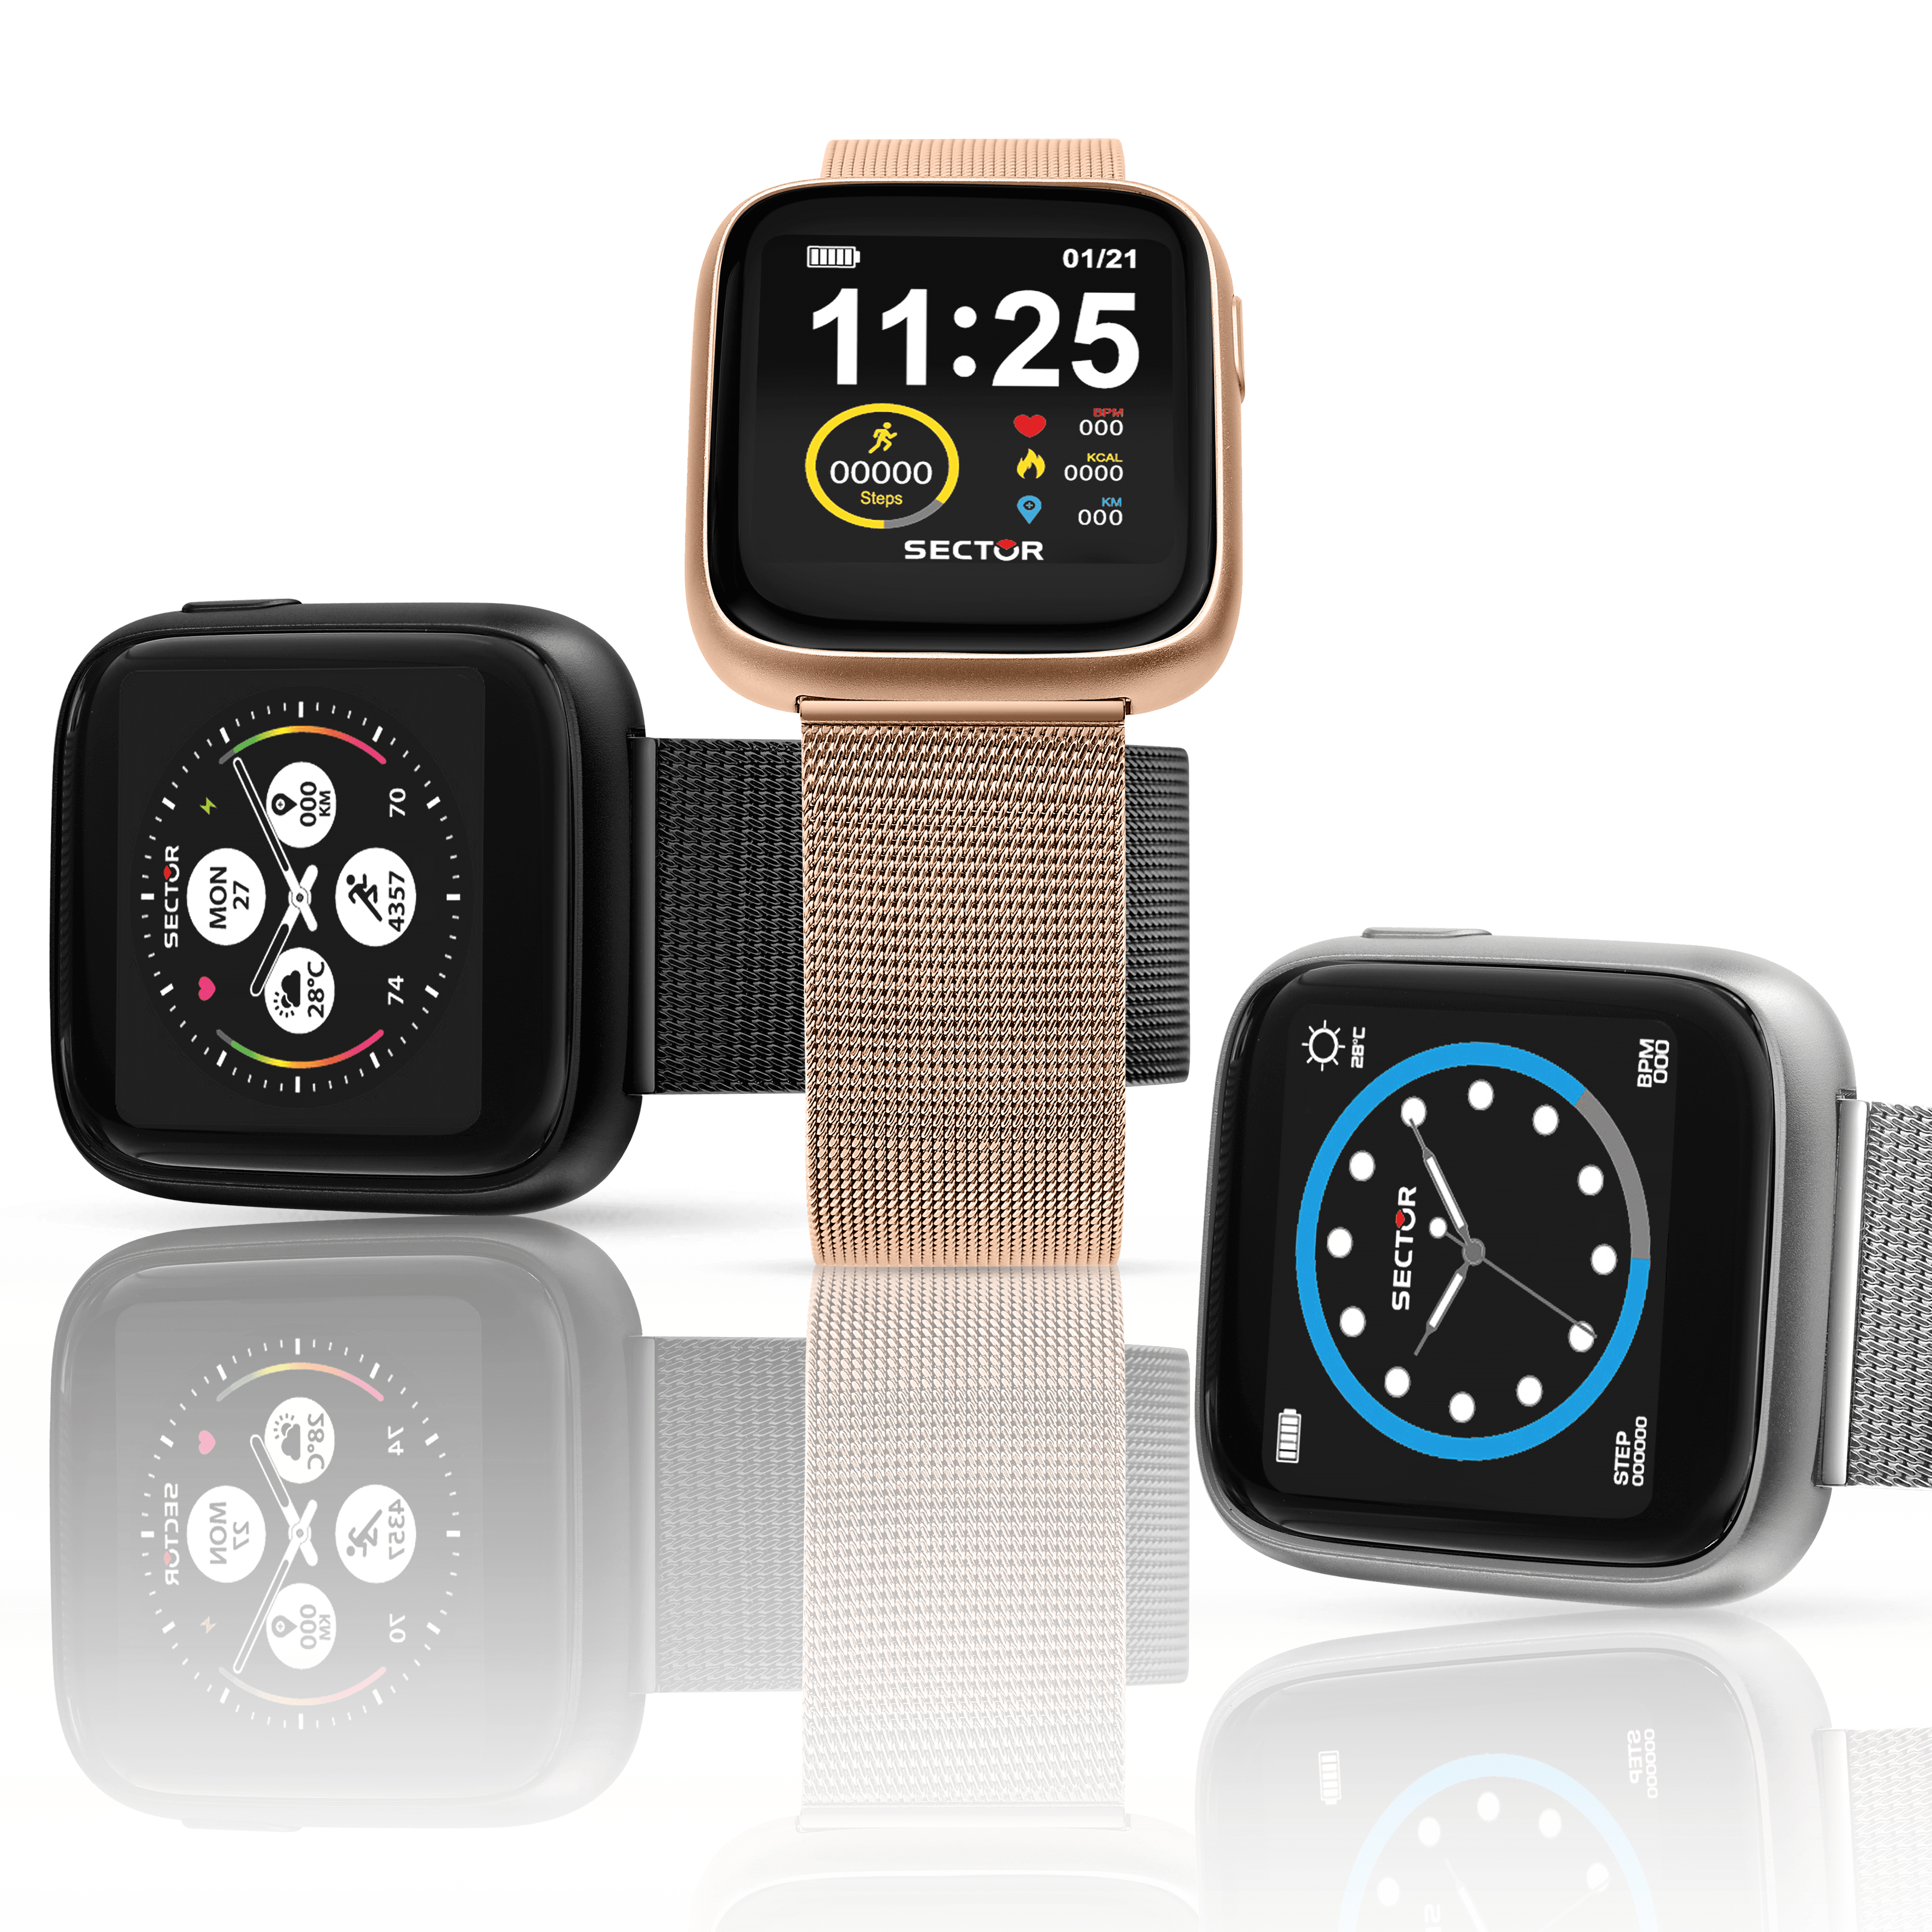 S-04 Smartwatch collection 40 mm